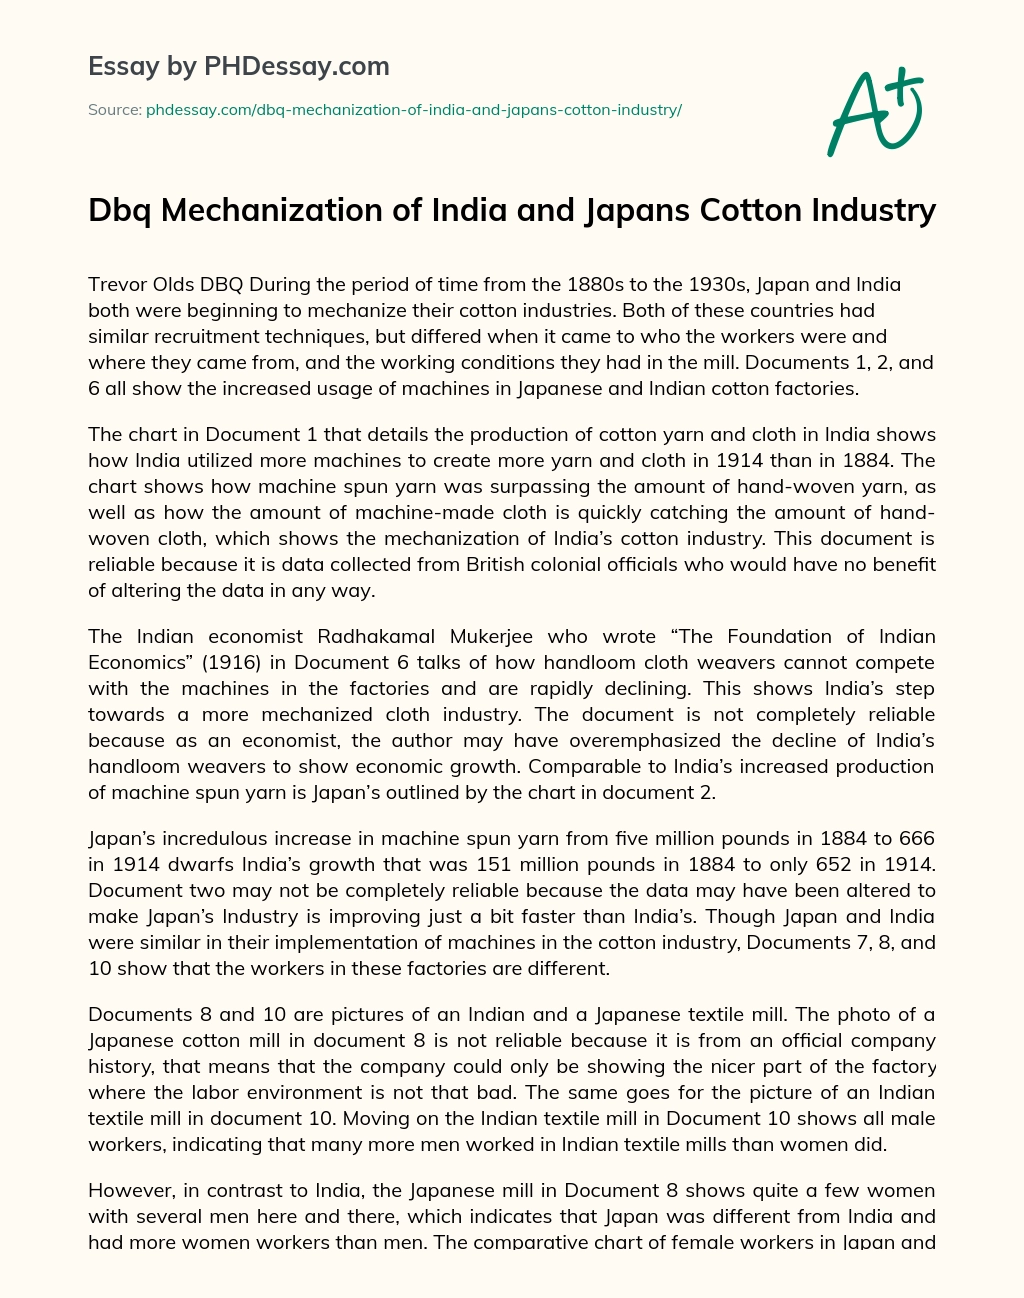 Dbq Mechanization of India and Japans Cotton Industry essay